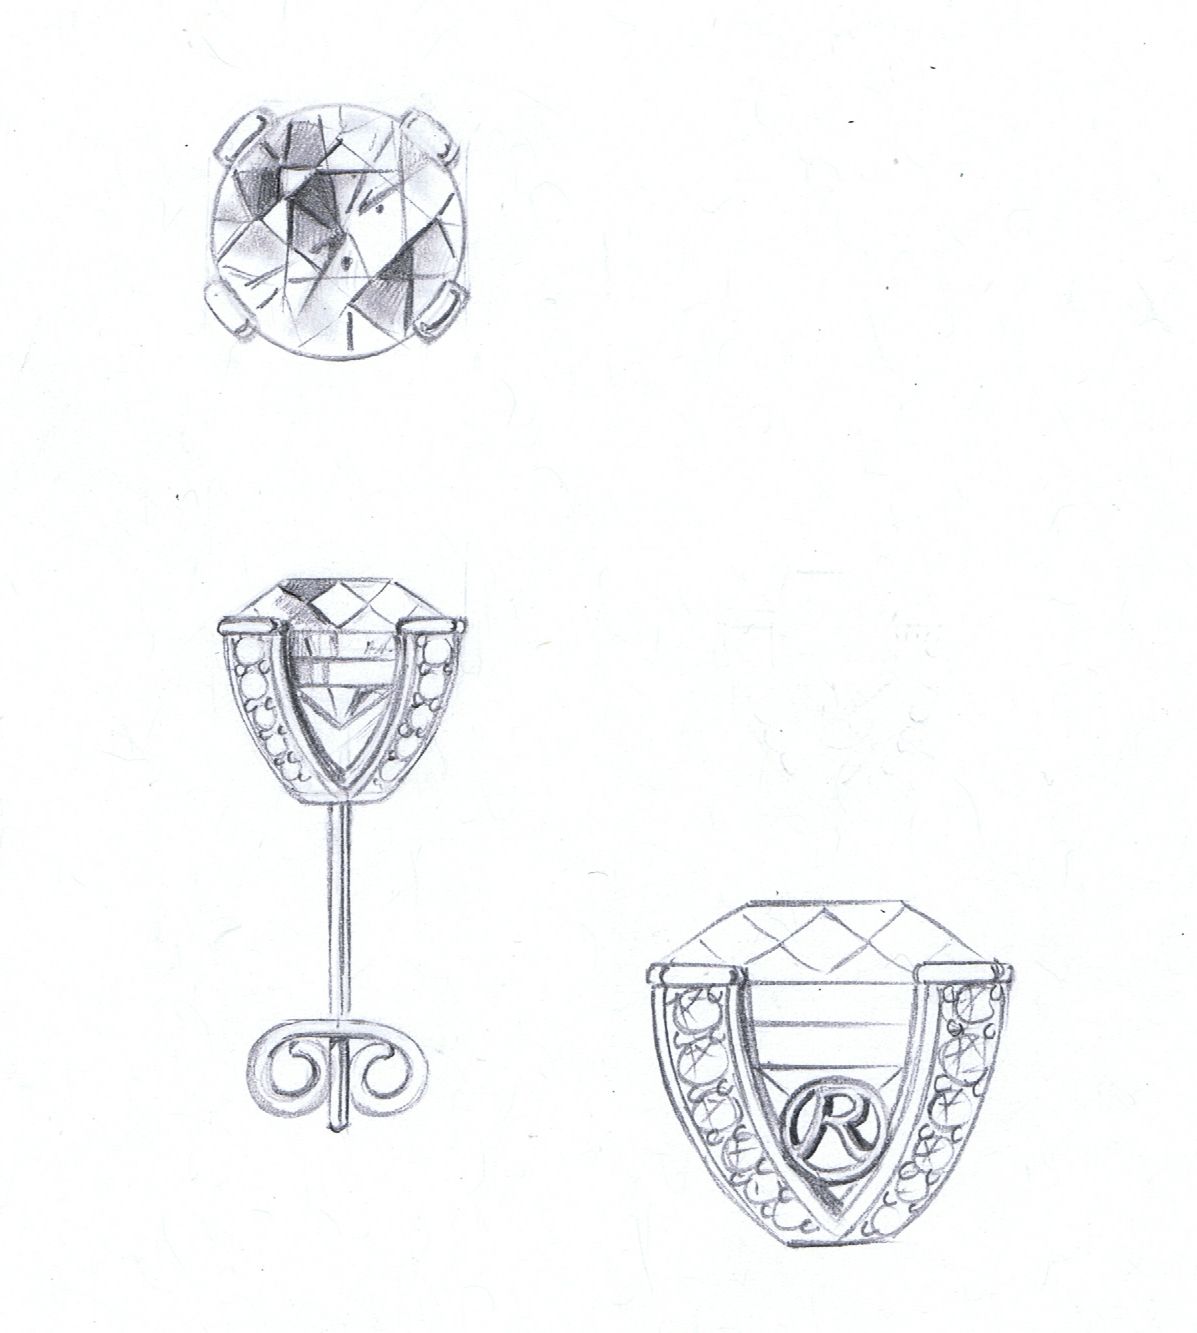 Sketch of an elegant new couture design we're looking to debut soon!  #design #jewelry | Jewellery design sketches, Jewelry design inspiration,  Art jewelry design